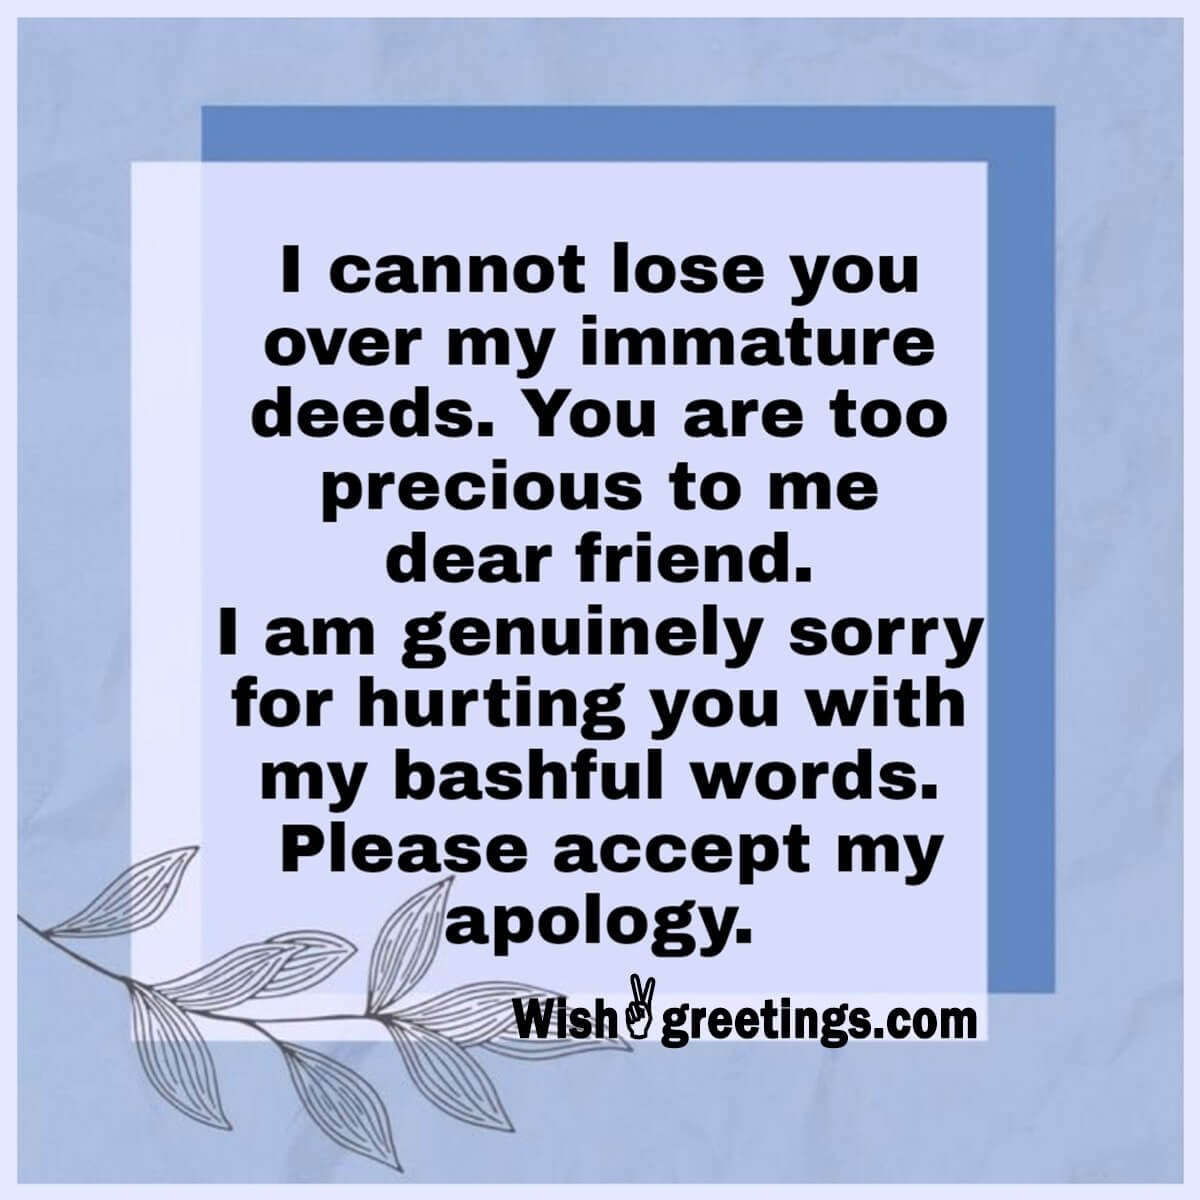 Apology Messages for Friend - Wish Greetings